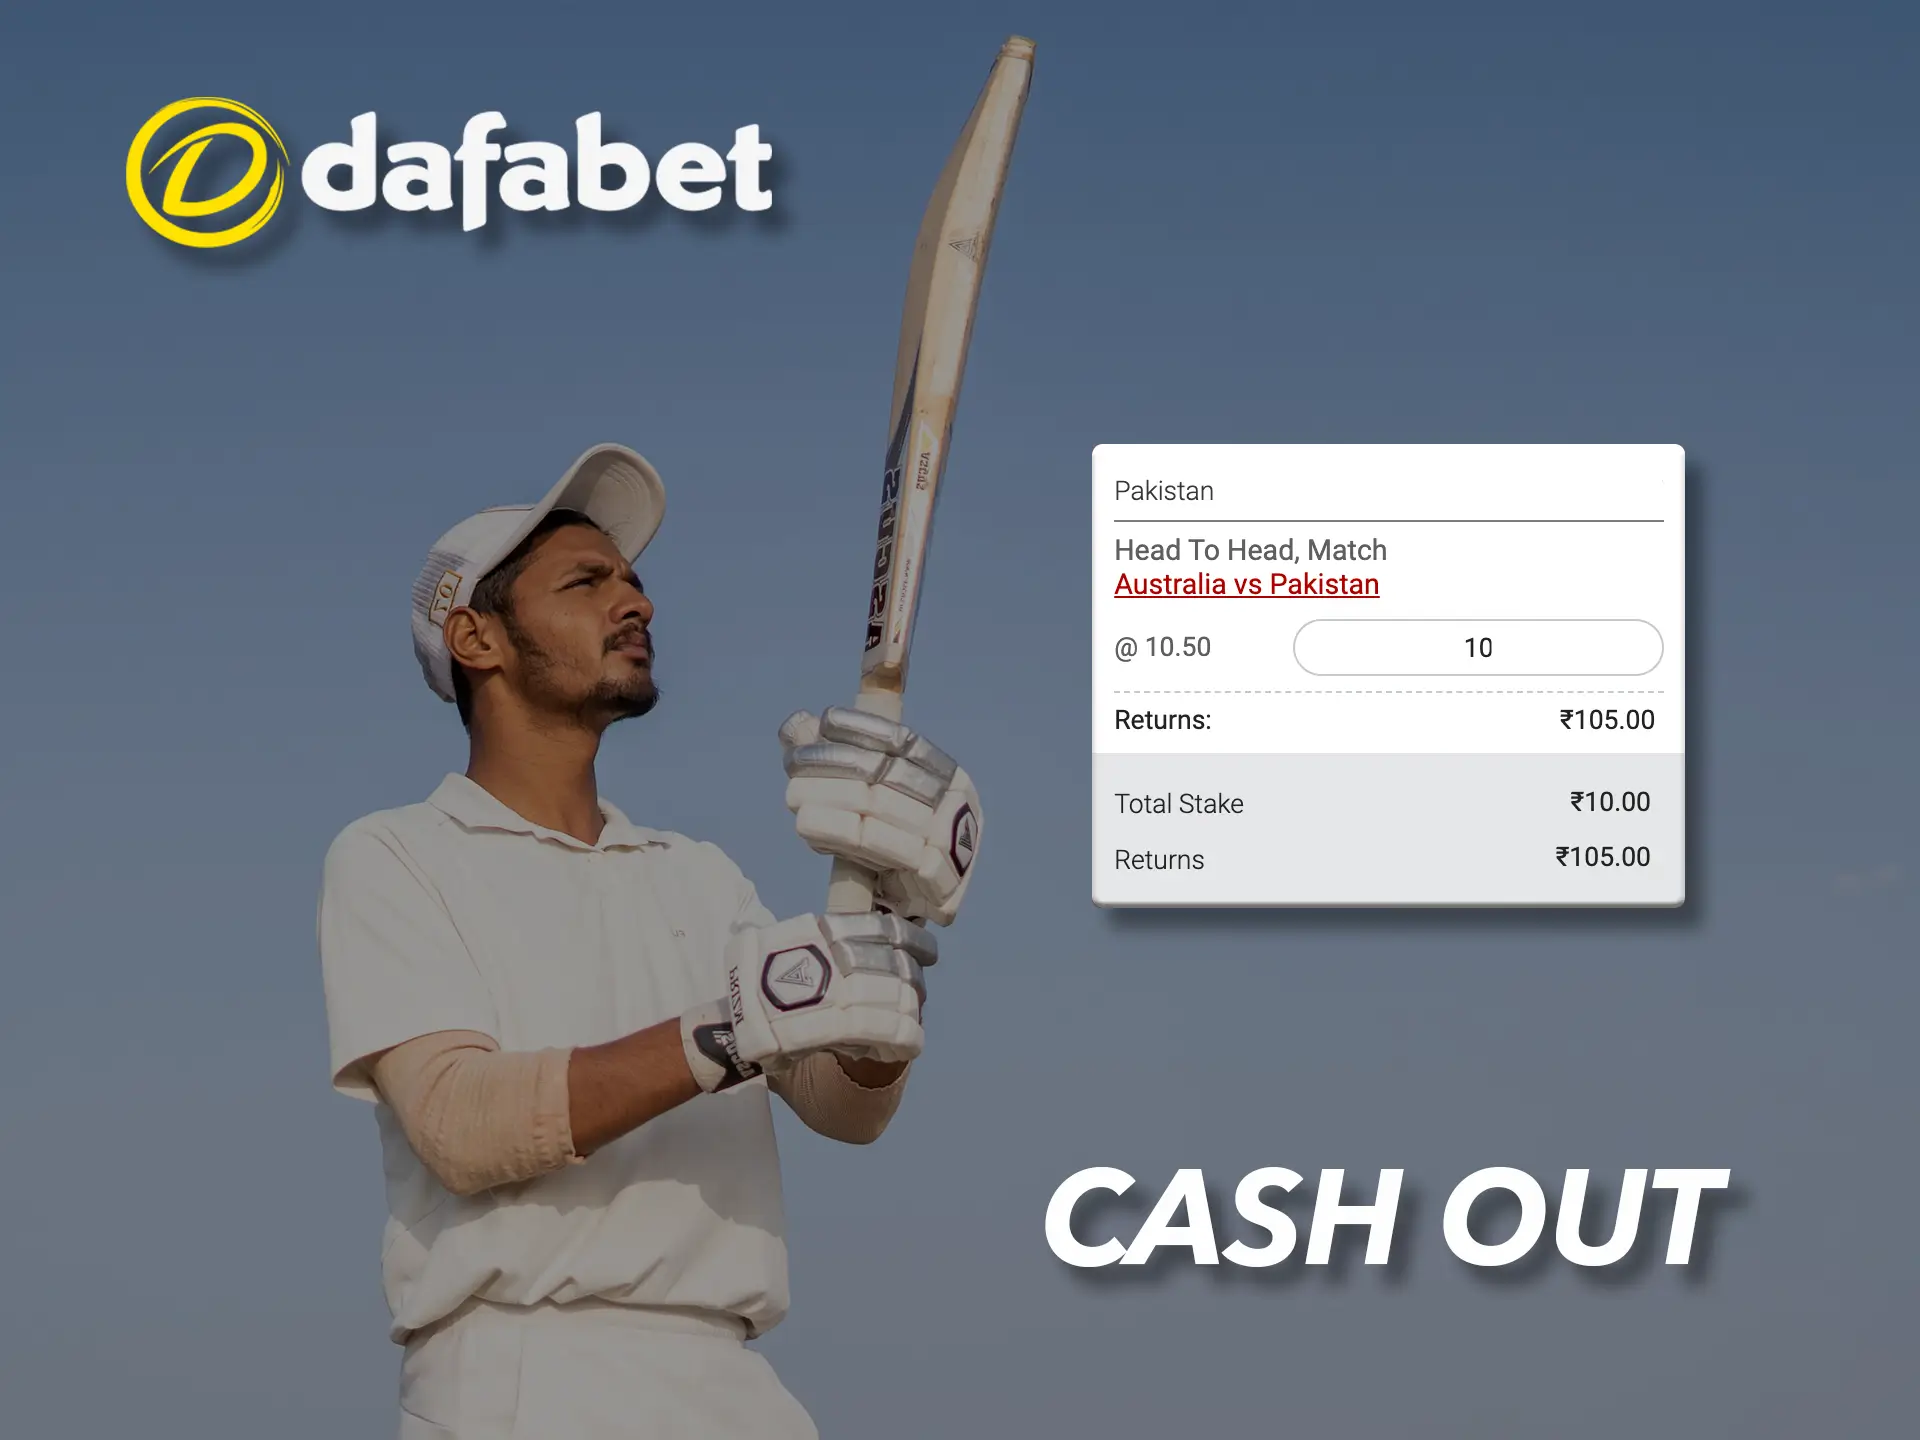 The Dafabet website can instantly calculate your winnings if you win.